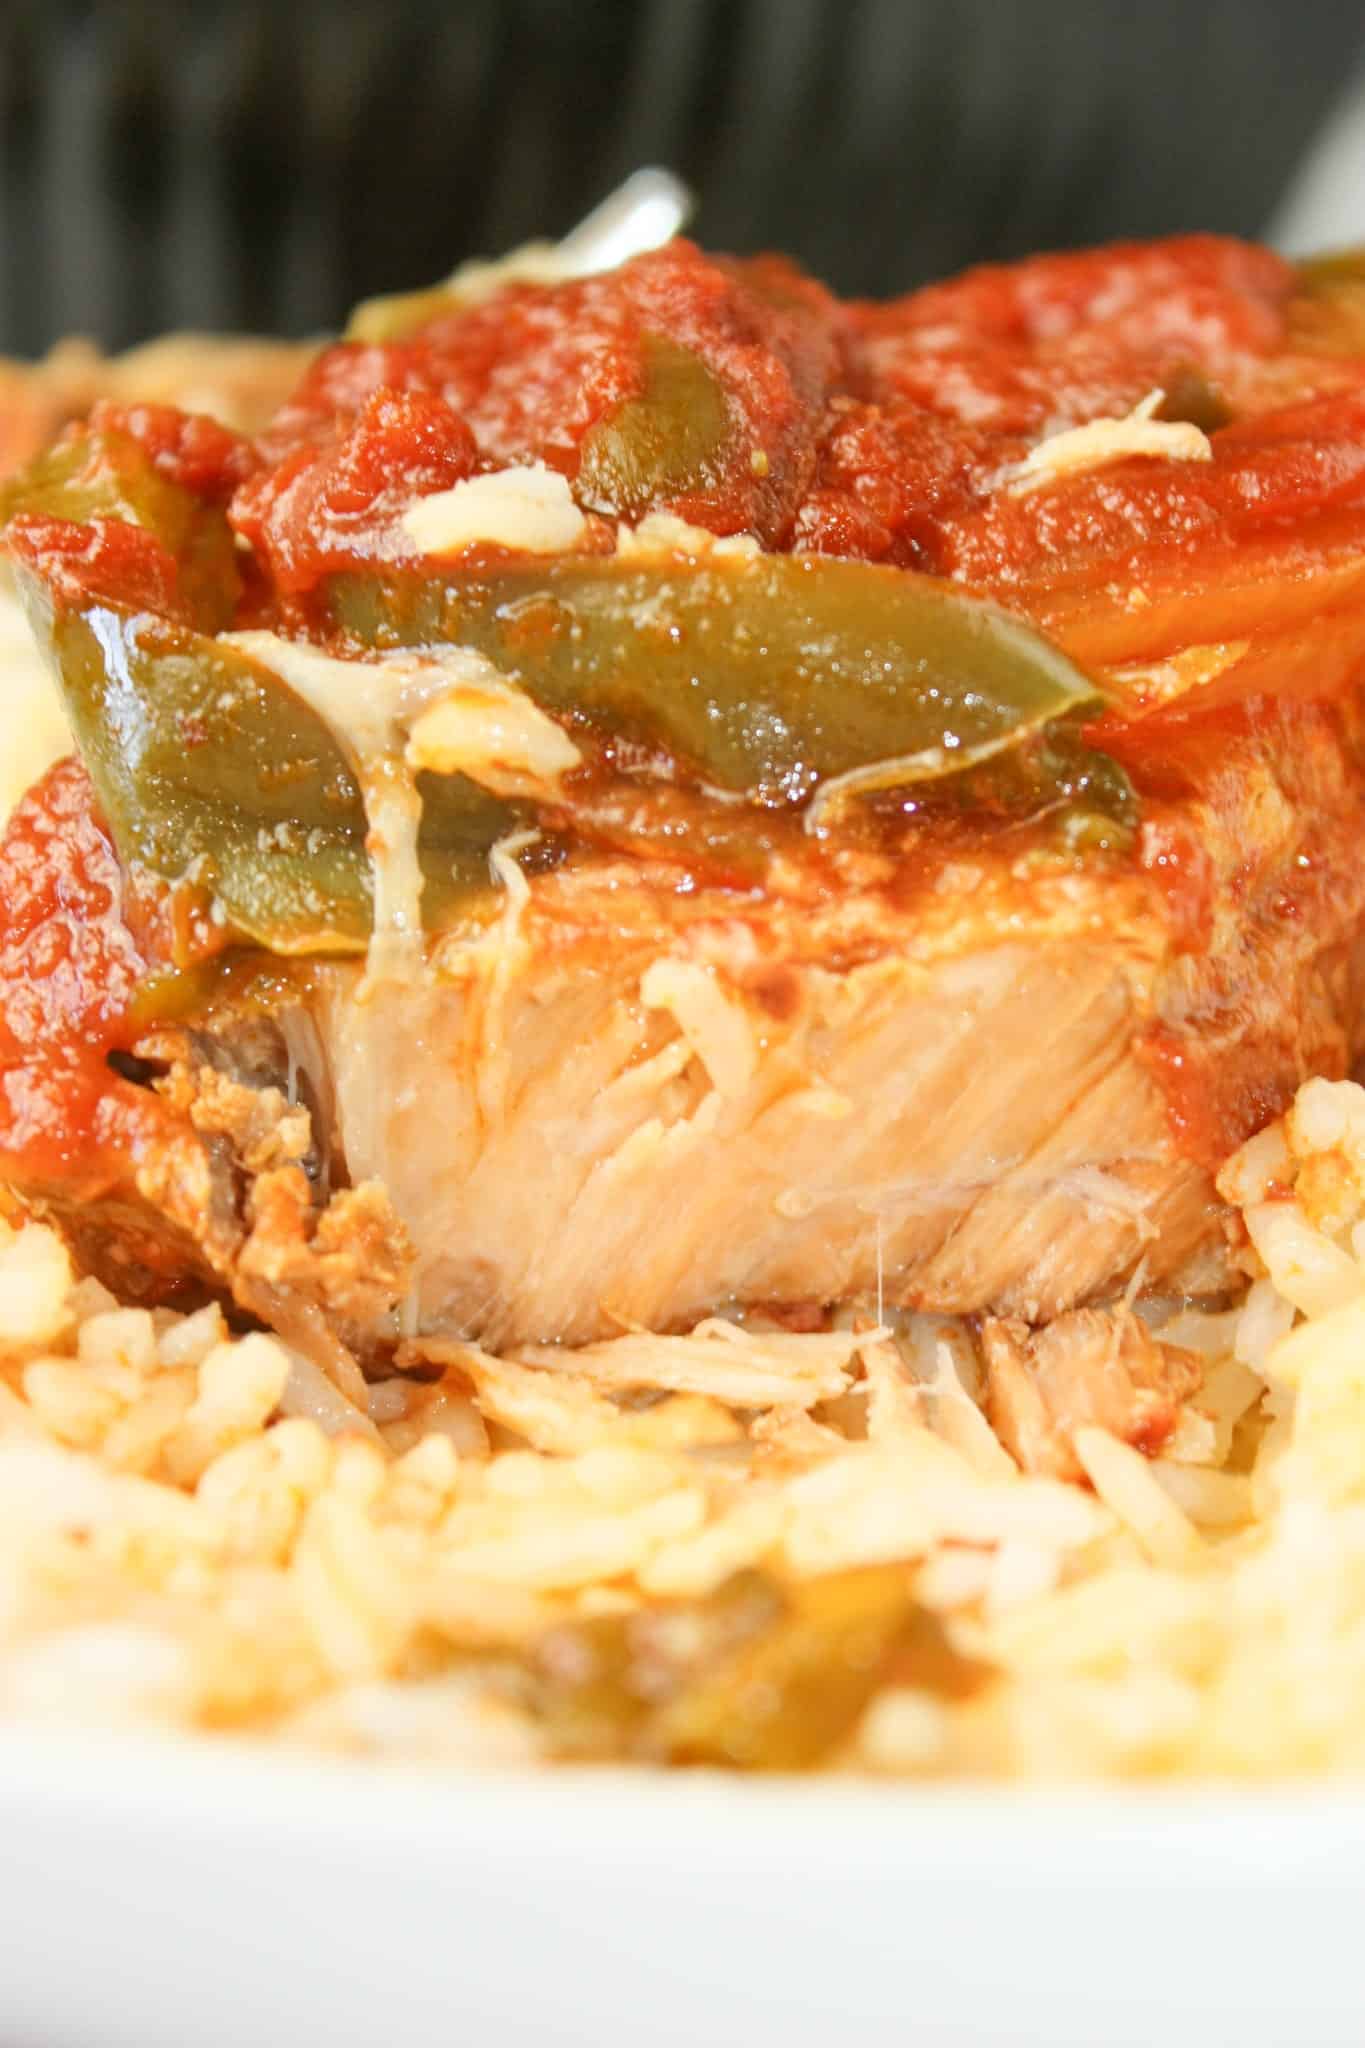 Crock Pot Spicy Pork Chops is an easy slow cooker recipe for any time of the year.  Boneless pork chops smothered in a flavourful tomato sauce makes a wonderful comfort food main course.